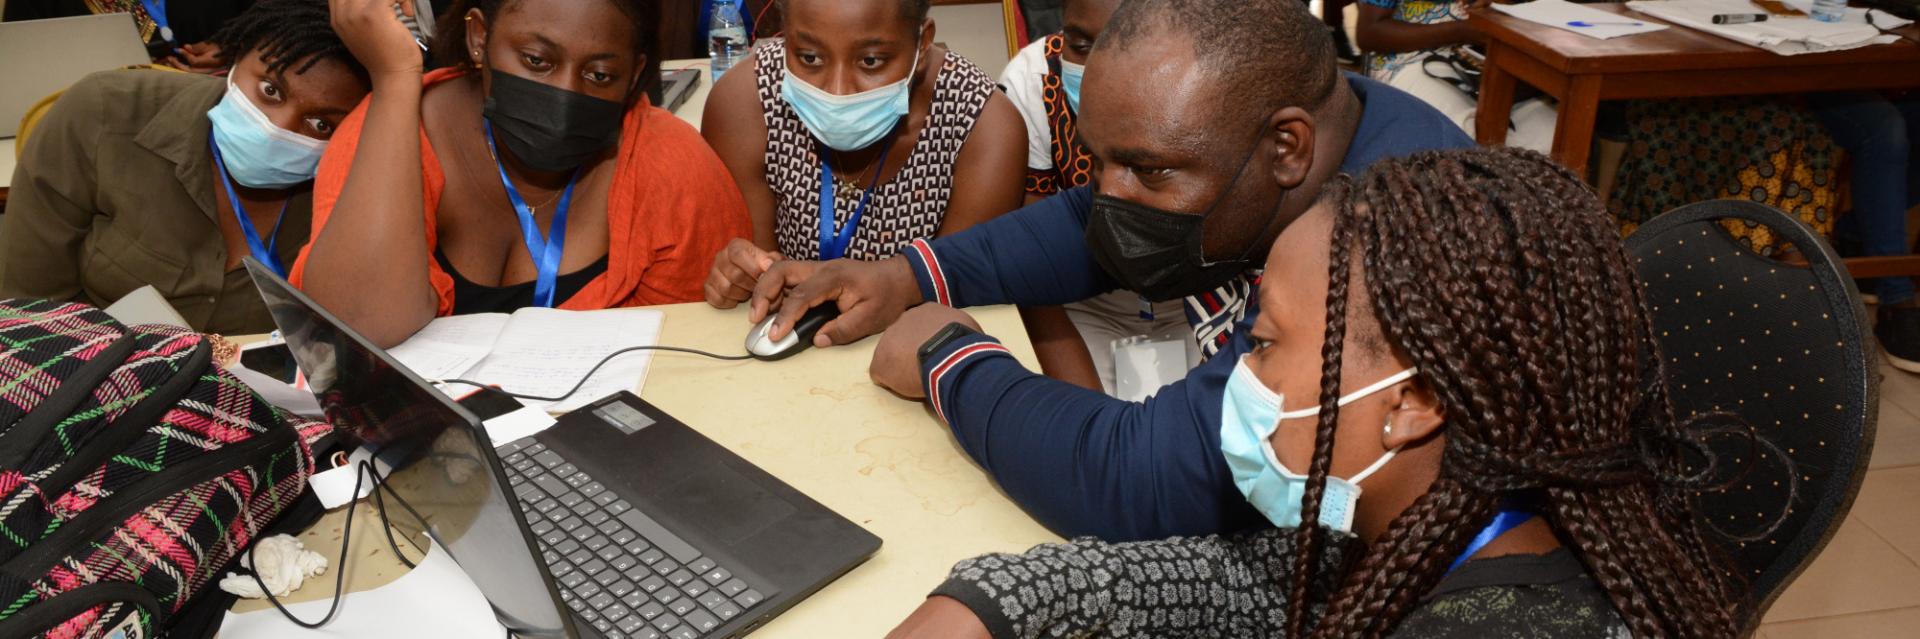 African girls produce over 70 inventions at 10-day coding camp